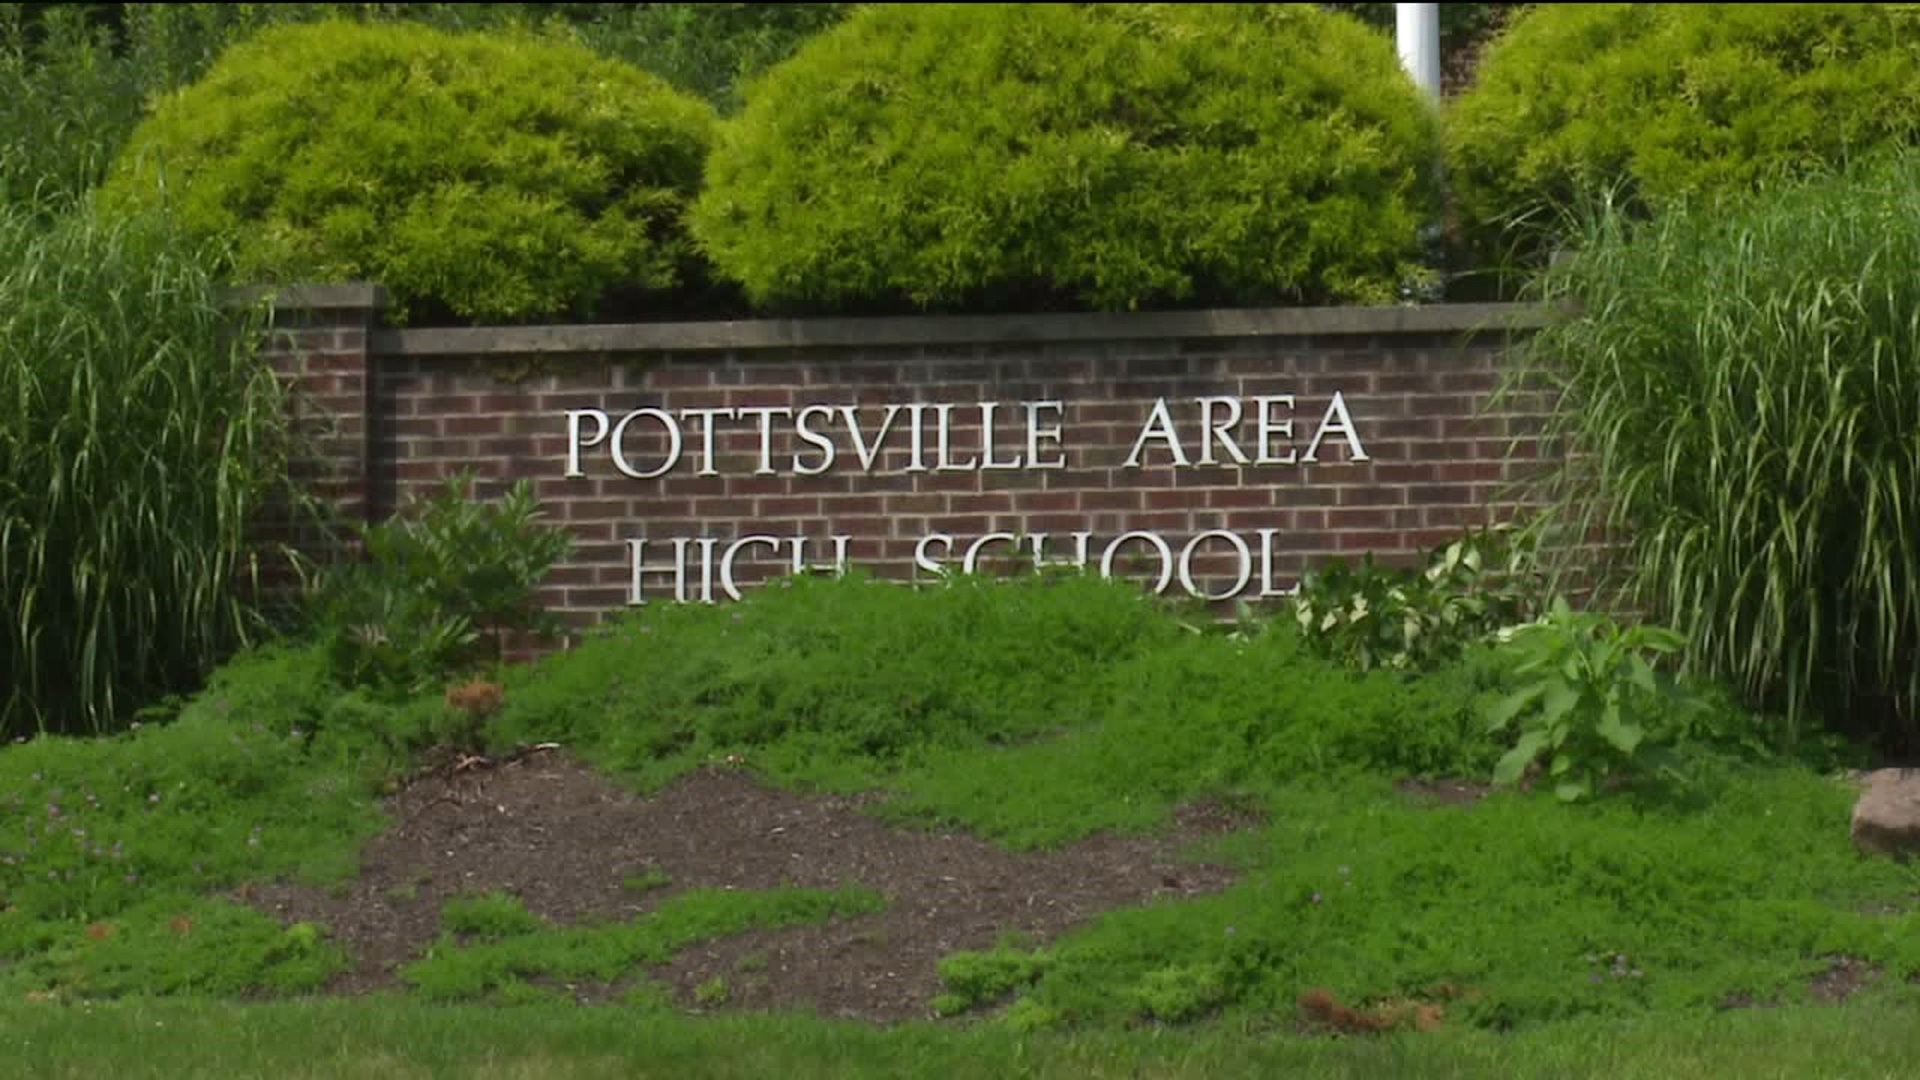 Making Changes to Ensure Safety at Pottsville Area